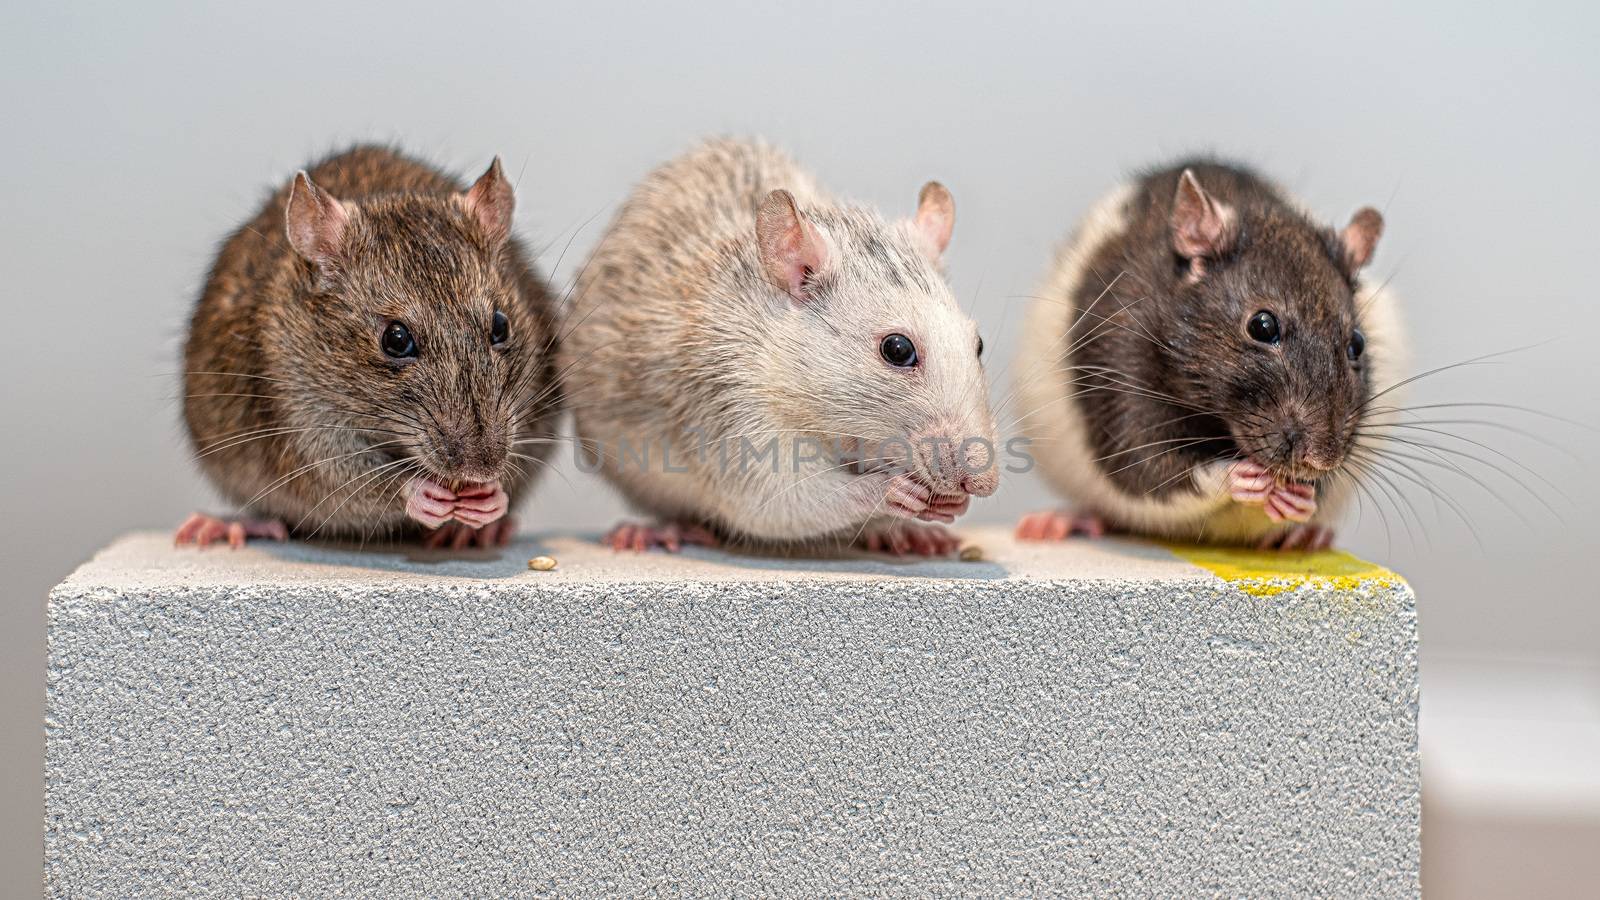 Three young pet rats (brown, grey and black and white) sitting and eating next to each other on a gas concrete block.